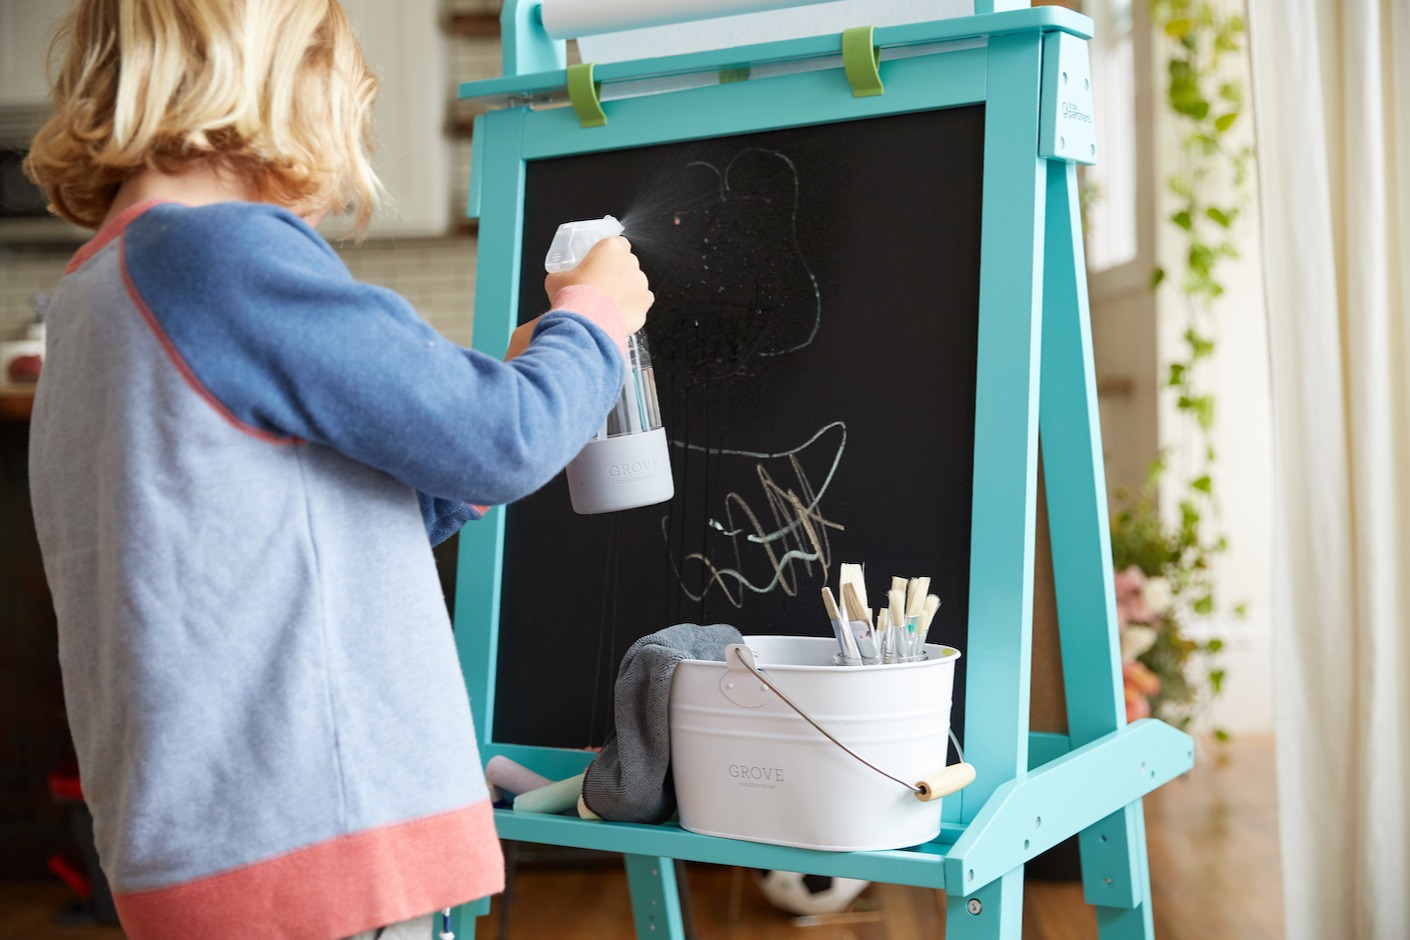 blonde child spraying chalkboard with cleaner from a glass bottle